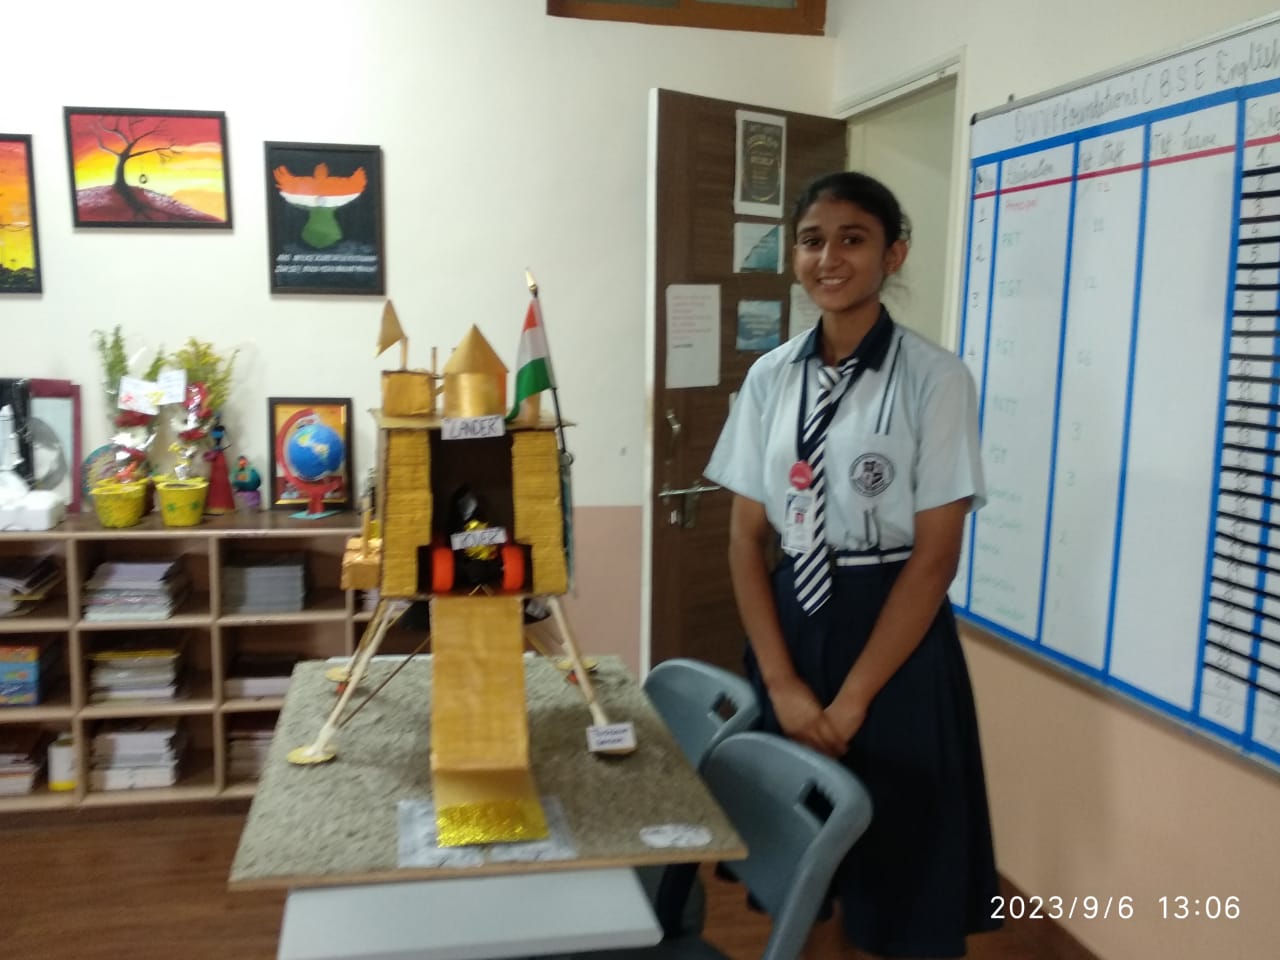 Chandrayan Model Made by our student